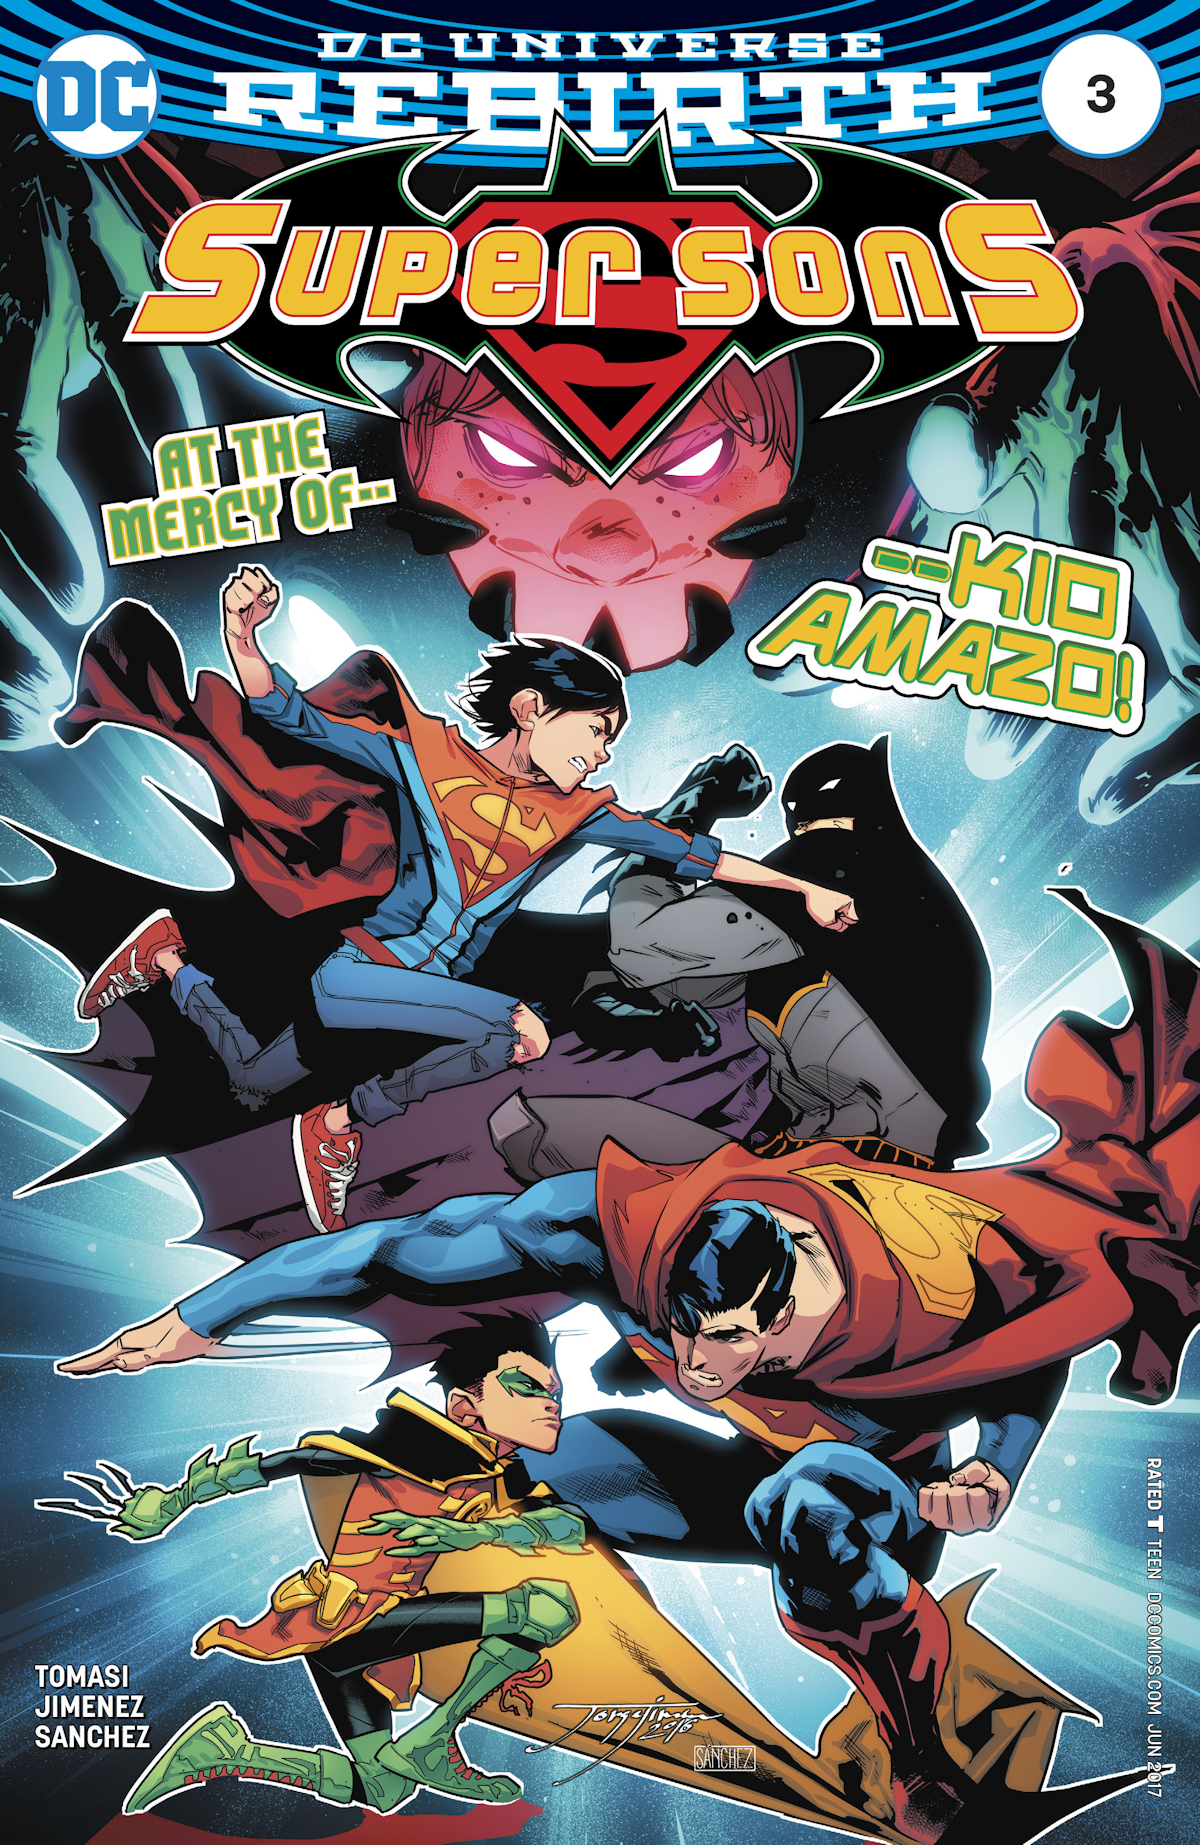 Super Sons 3 (Cover A)